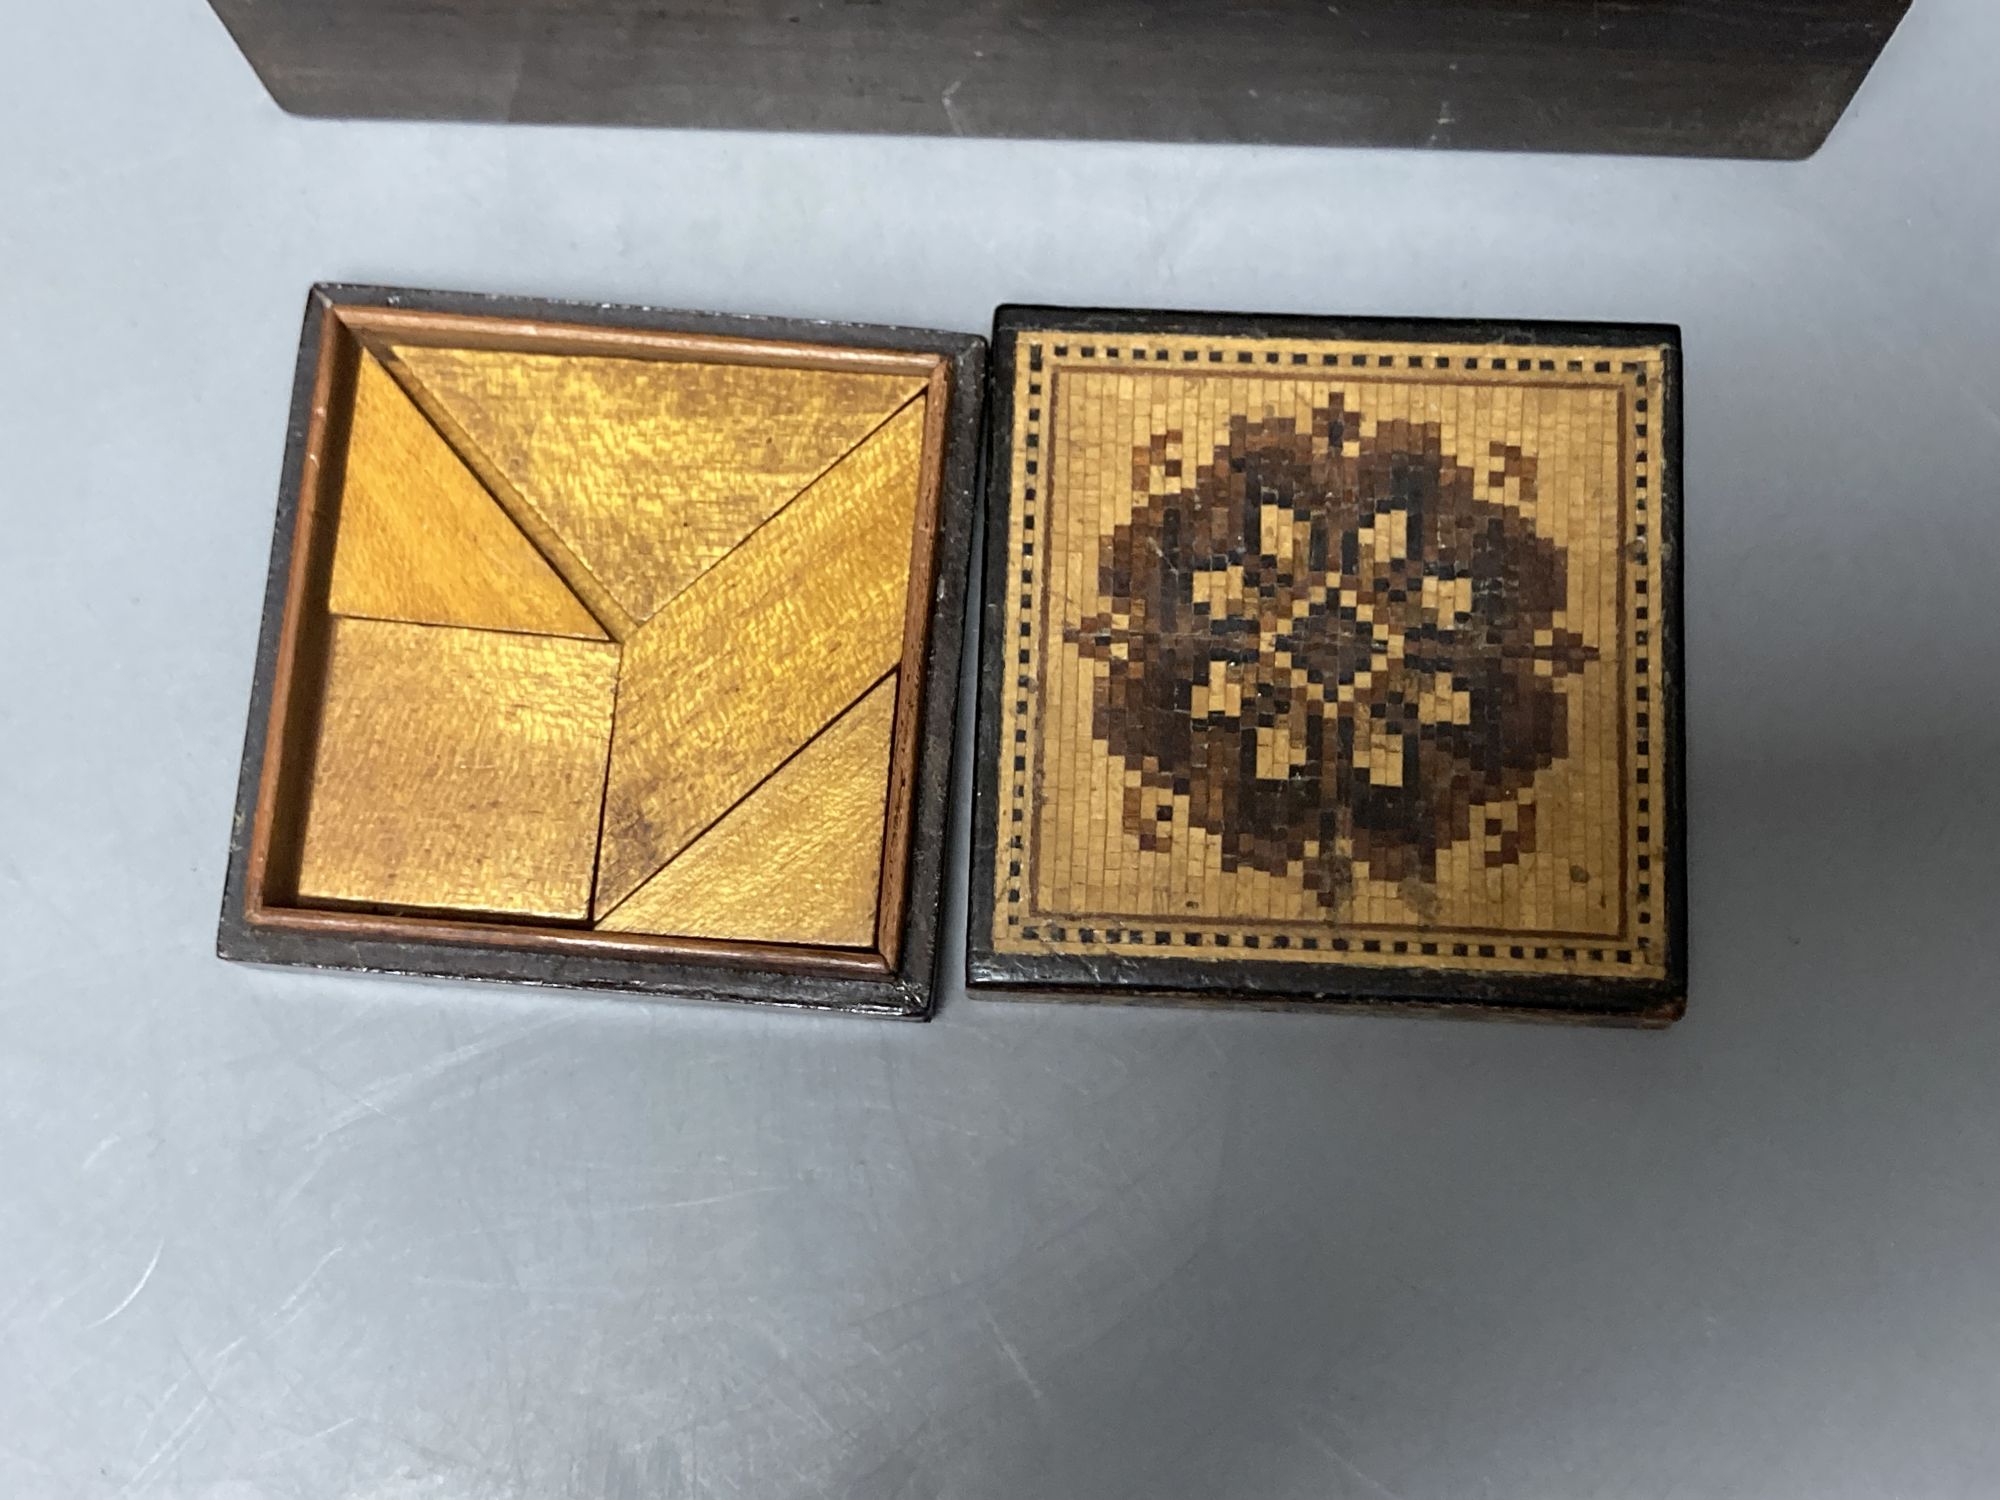 A Tunbridge ware mosaic lidded tangram puzzle and a half square mosaic box with inner tray, mid 19th century, 5cm and 11.6cm (2)